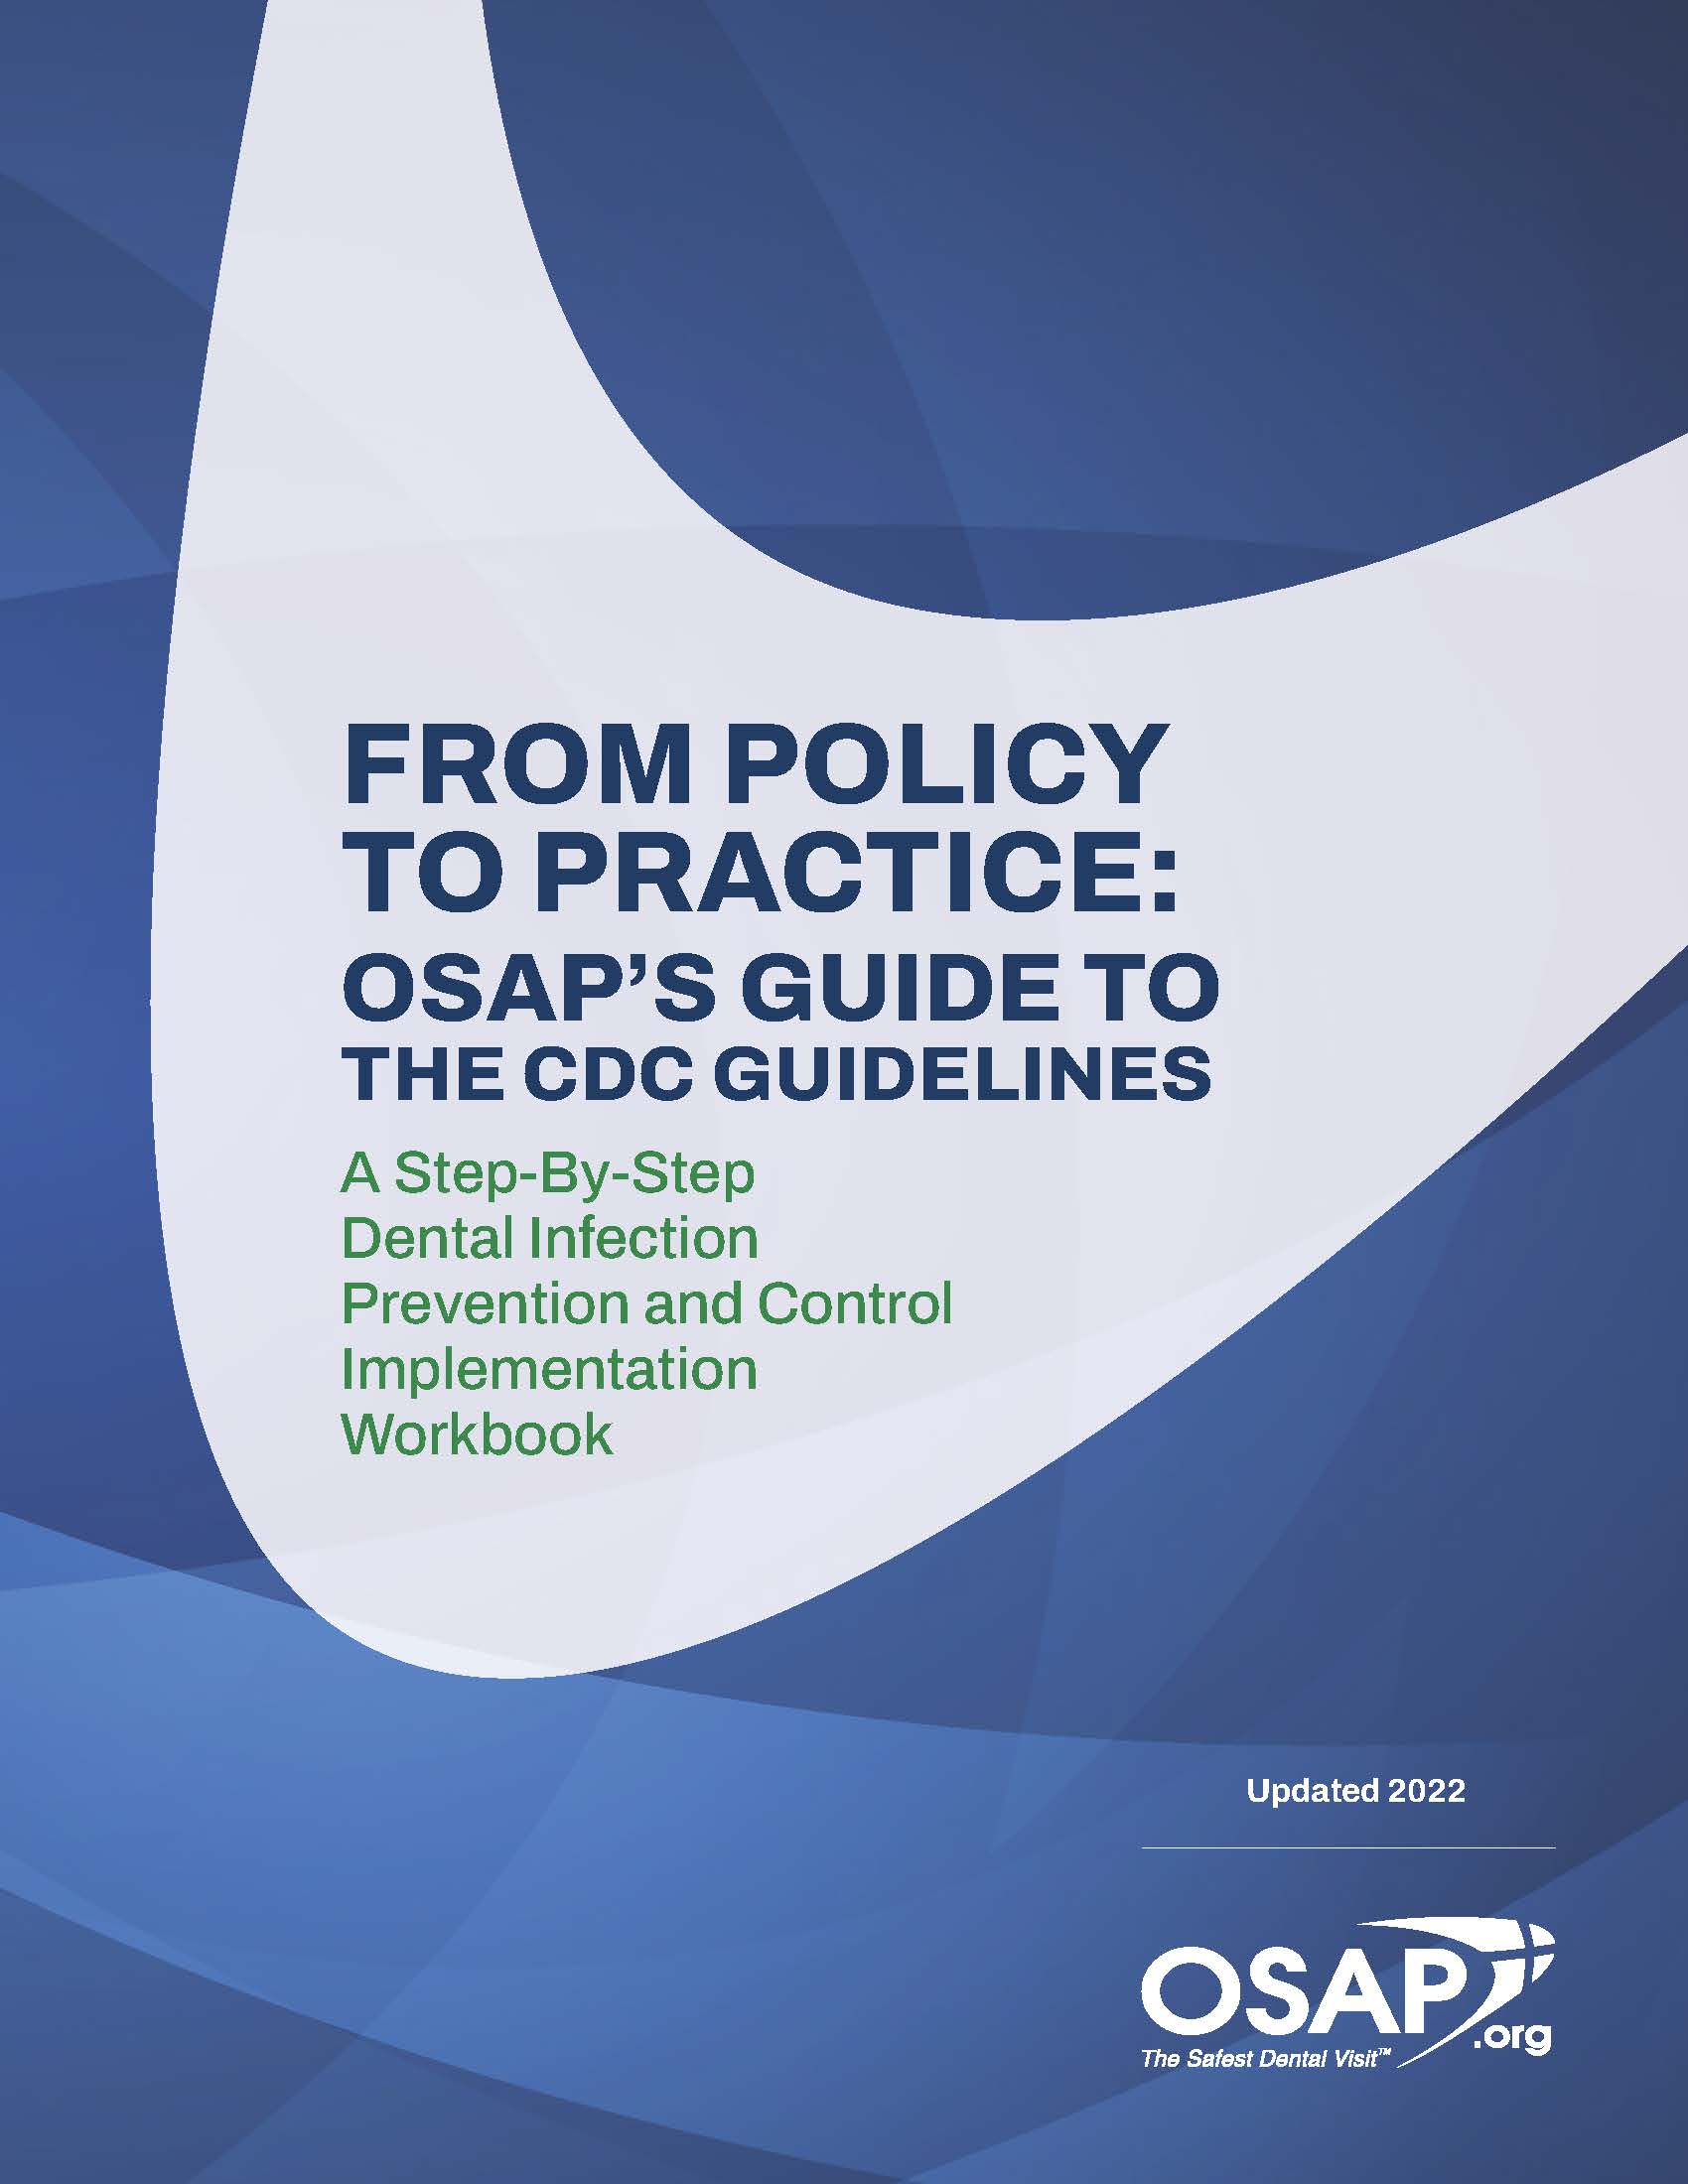 From Policy to Practice: OSAP's Guide to the CDC Guidelines (2022 Edition)